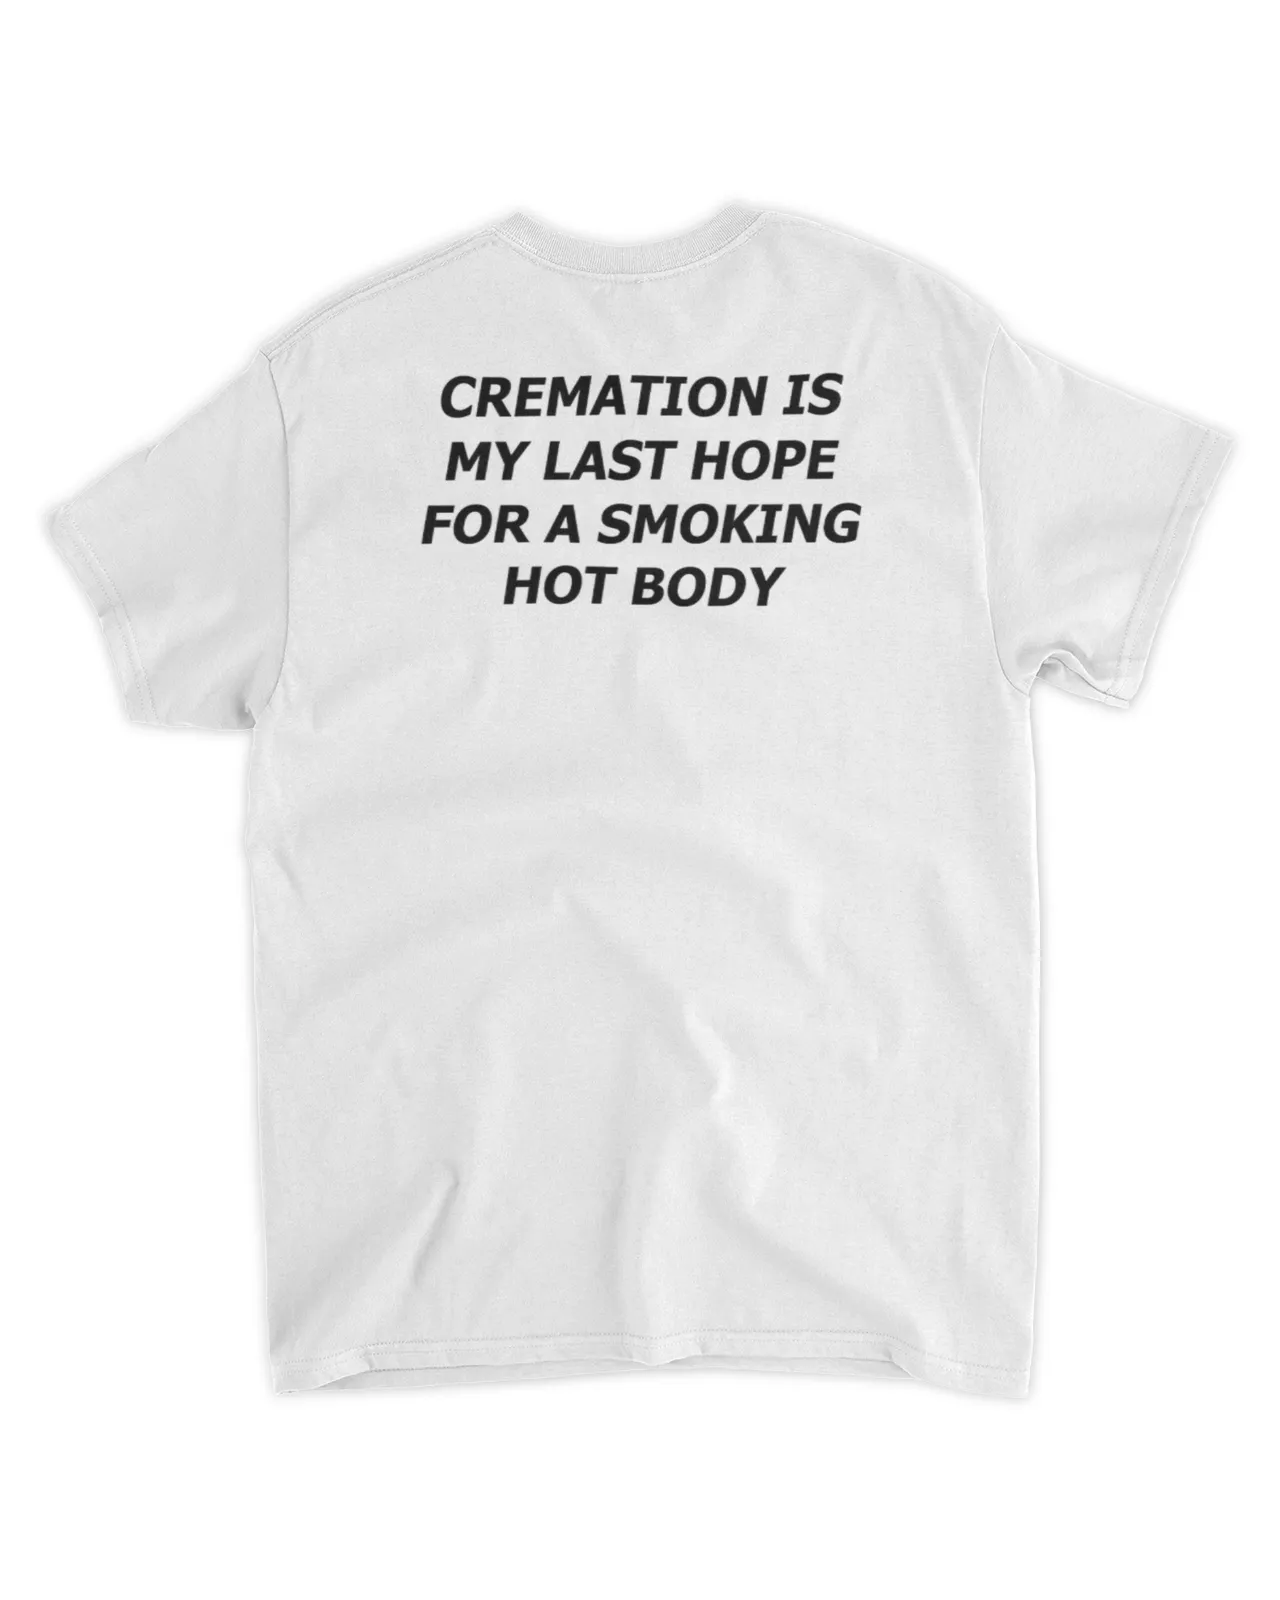  Cremation is my last hope for a smoking hot body shirt